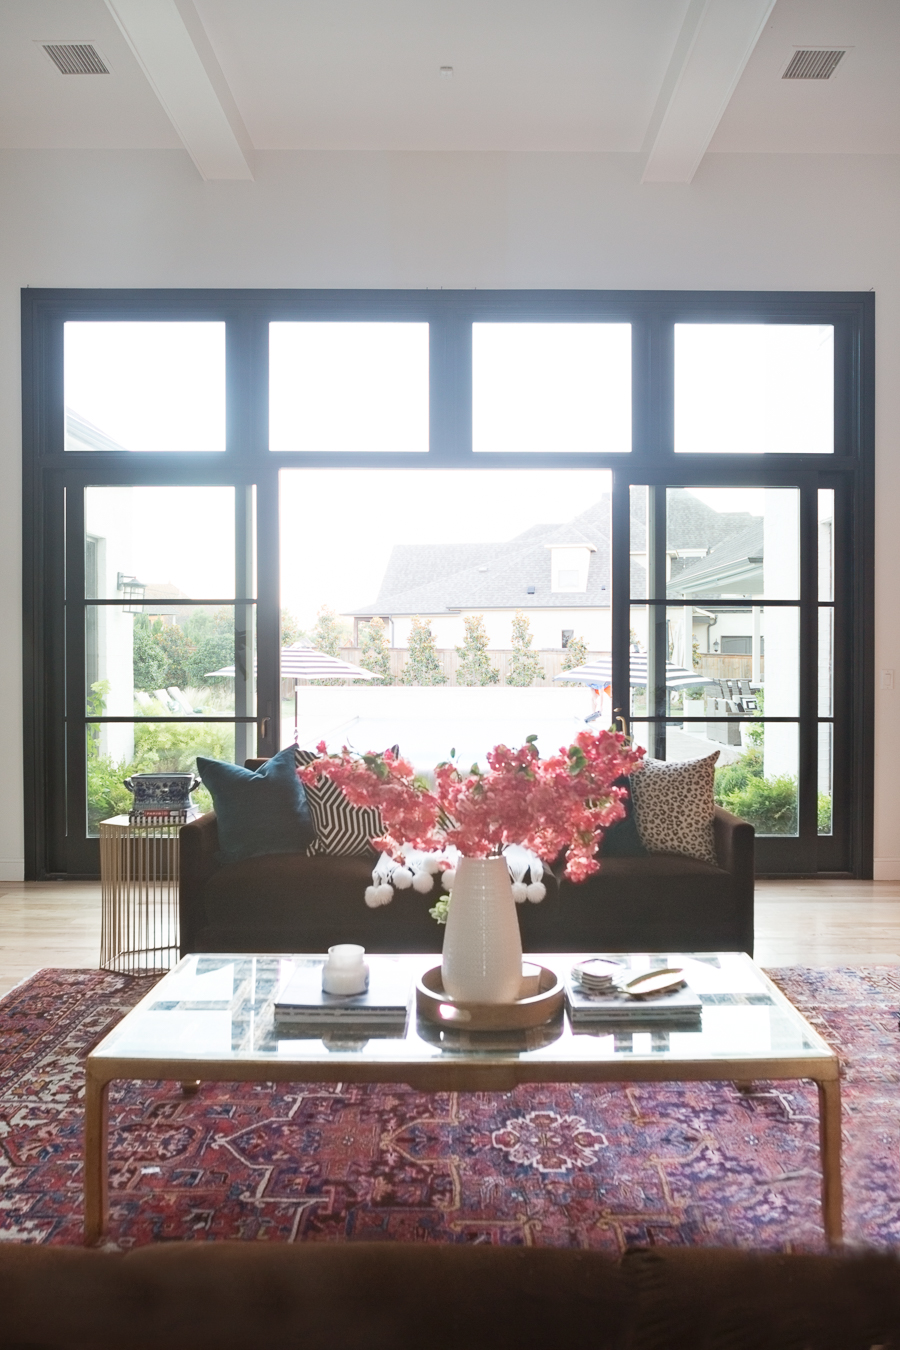 HOW TO FIND BLACK WINDOWS AND DOORS FOR LESS in a beautiful elcletic living room with flowers on the coffee table